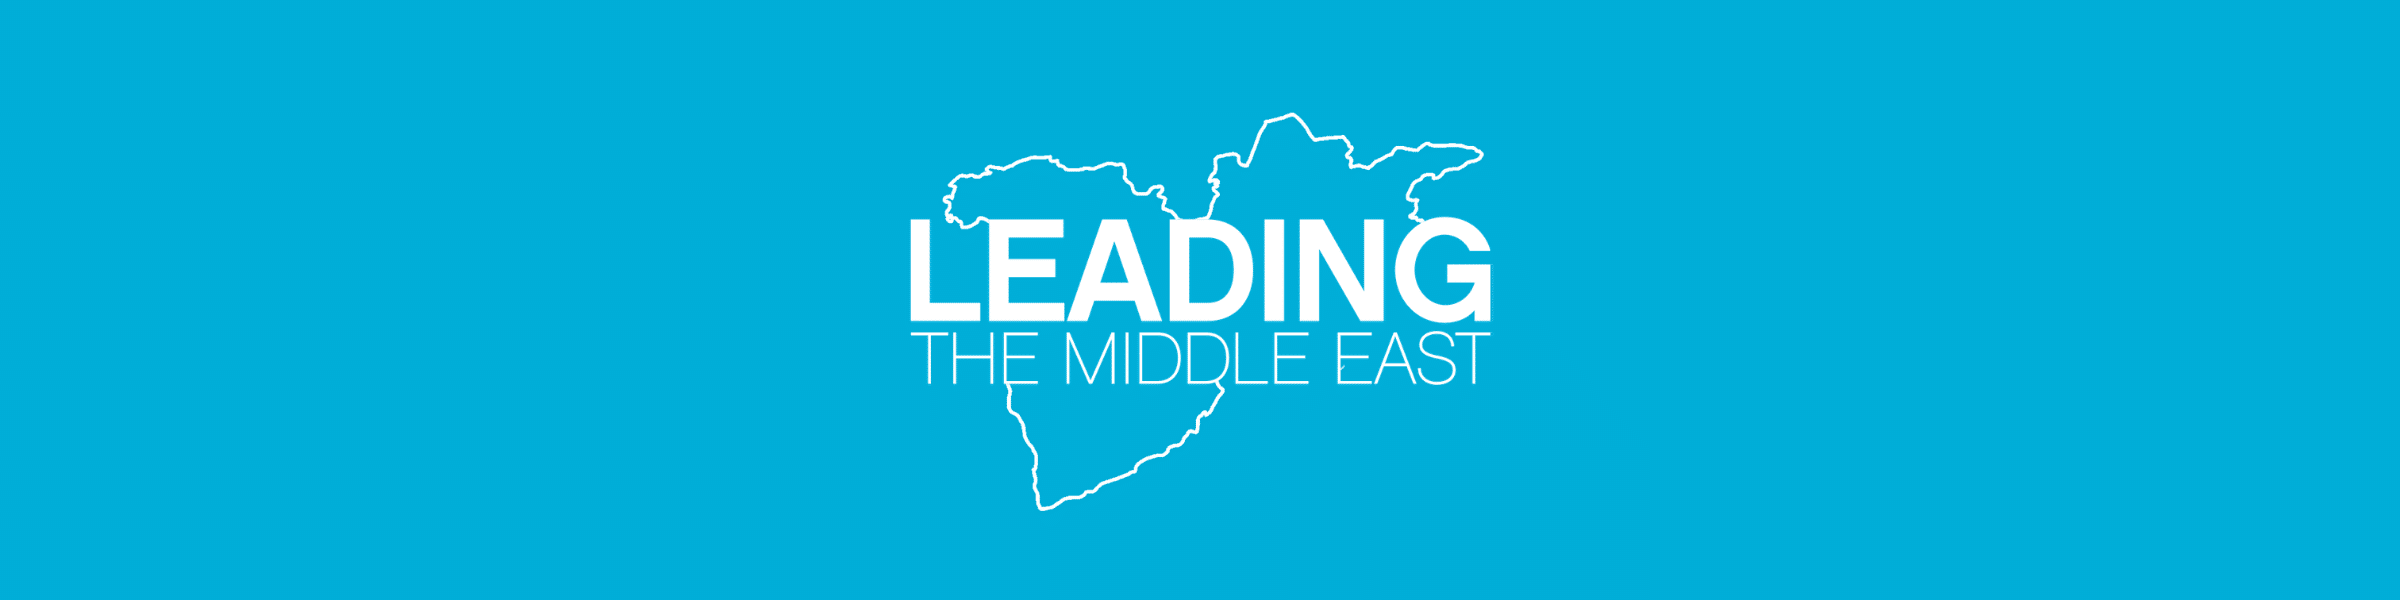 Leading the Middle East One Young World Scholarships 2022 (Fully-funded to attend One Young World Conference in Tokyo, Japan)